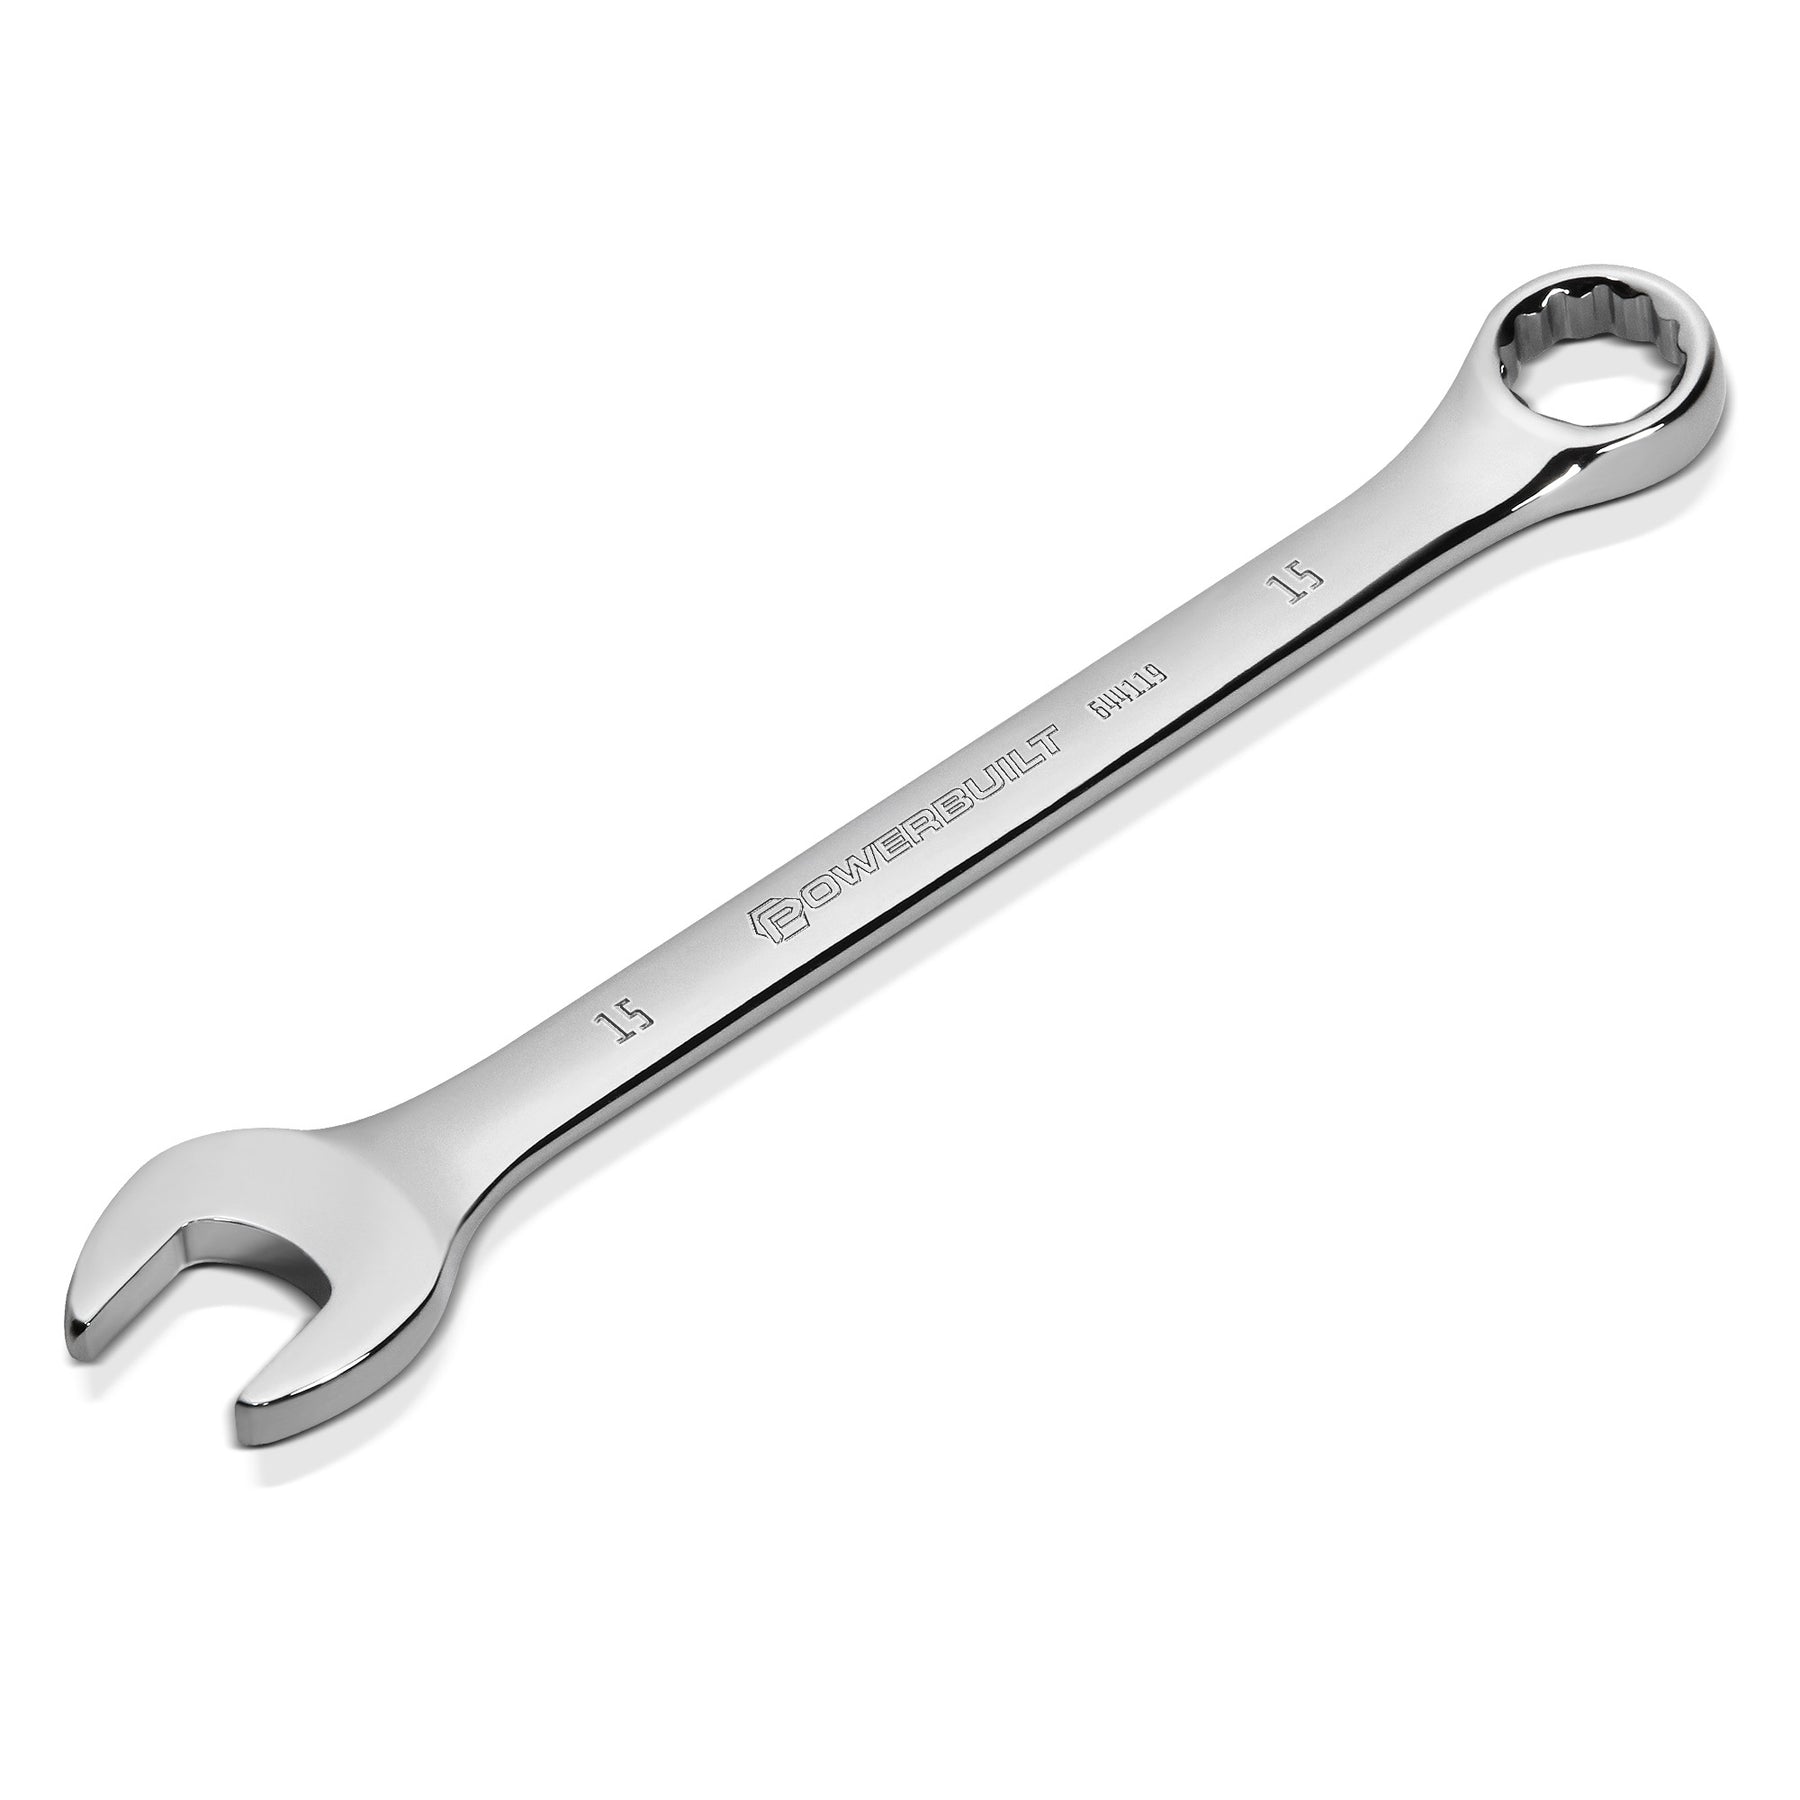 15 MM Fully Polished Metric Combination Wrench